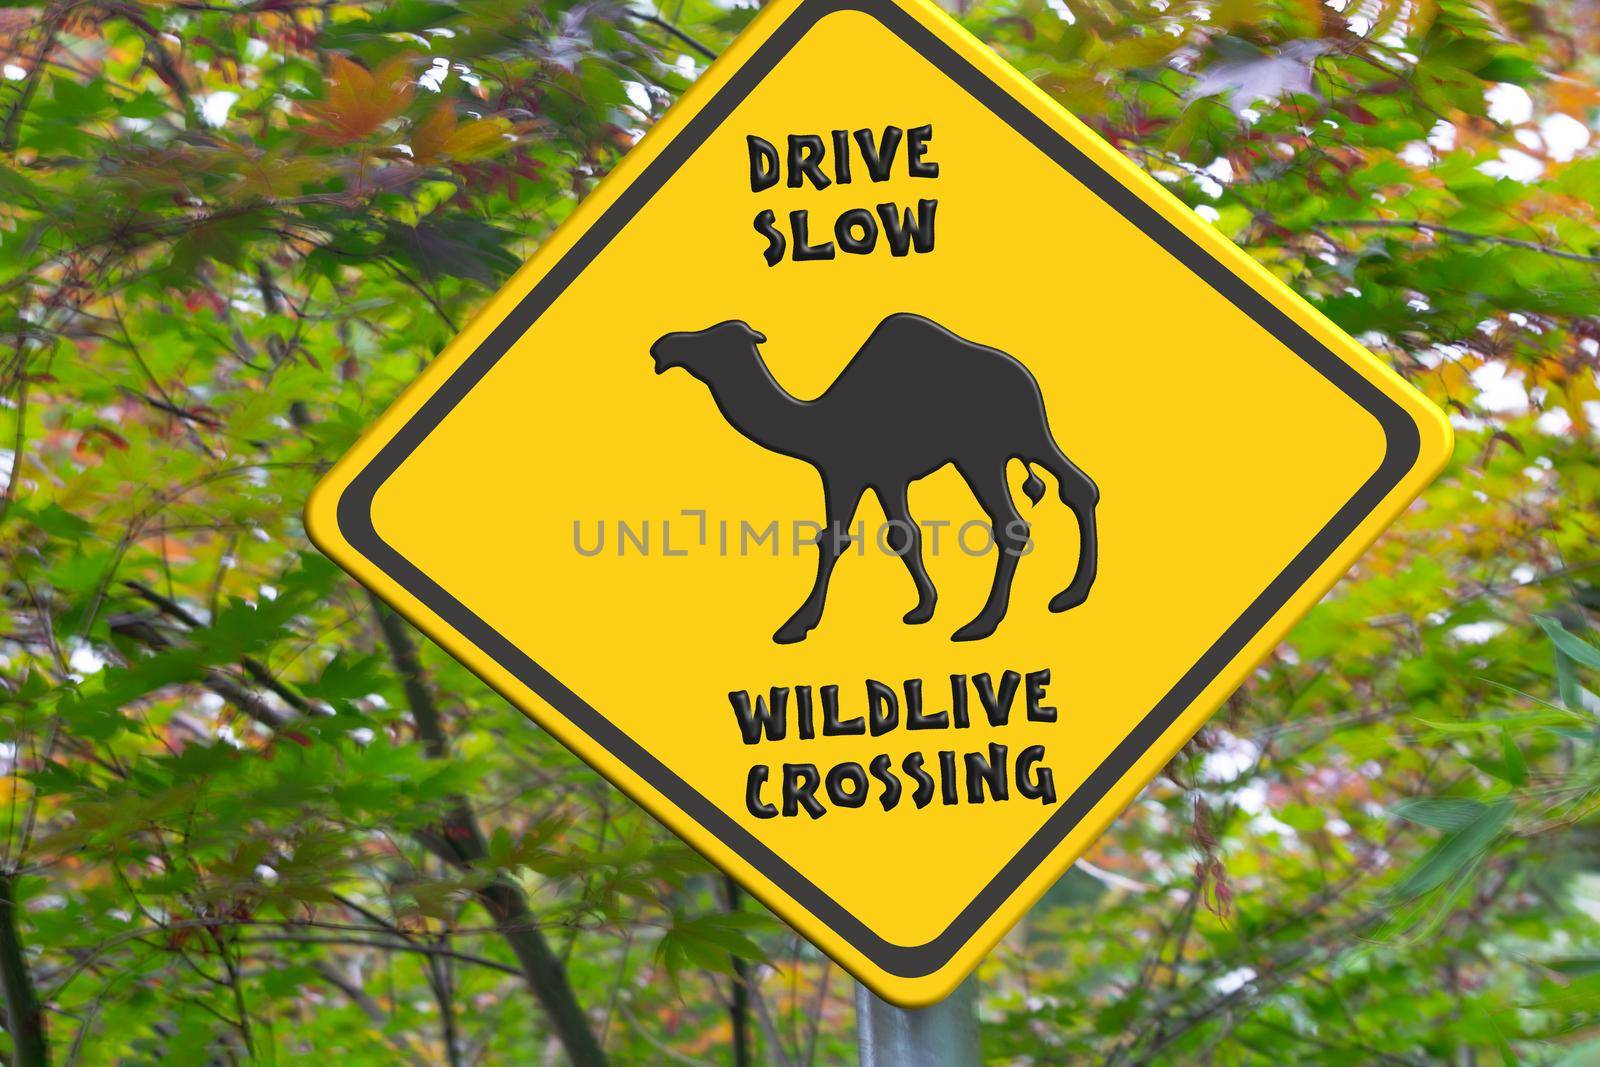 Camel warning sign                                  by JFsPic